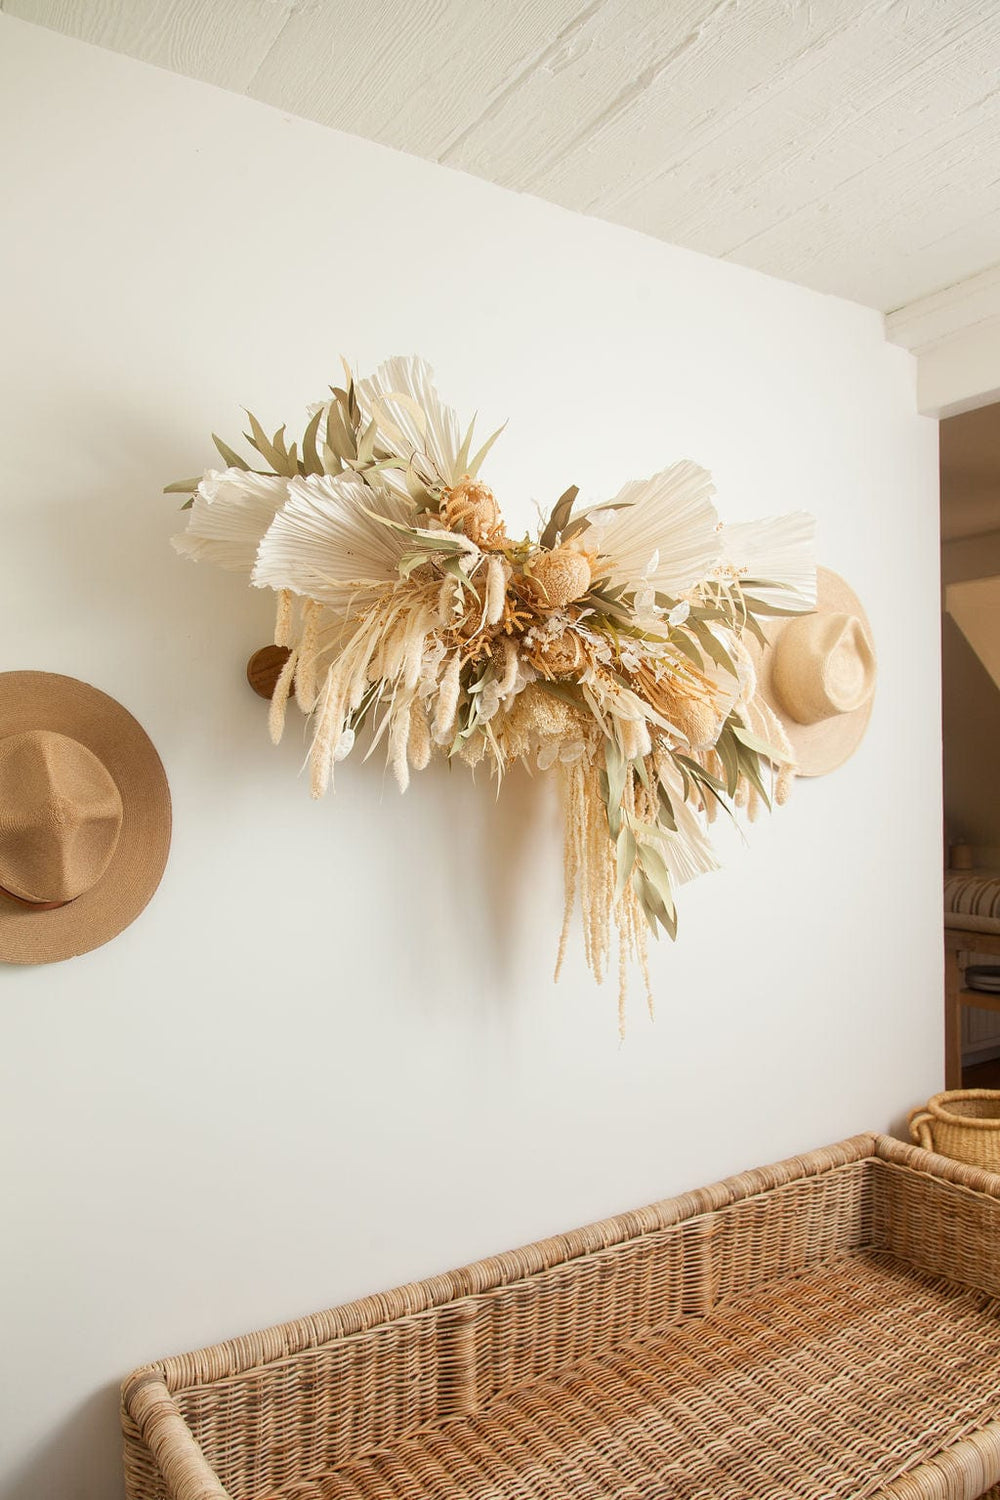 Idlewild Floral Co. Custom Wall Swag : Add to cart with your choice of at least 12 bunches.